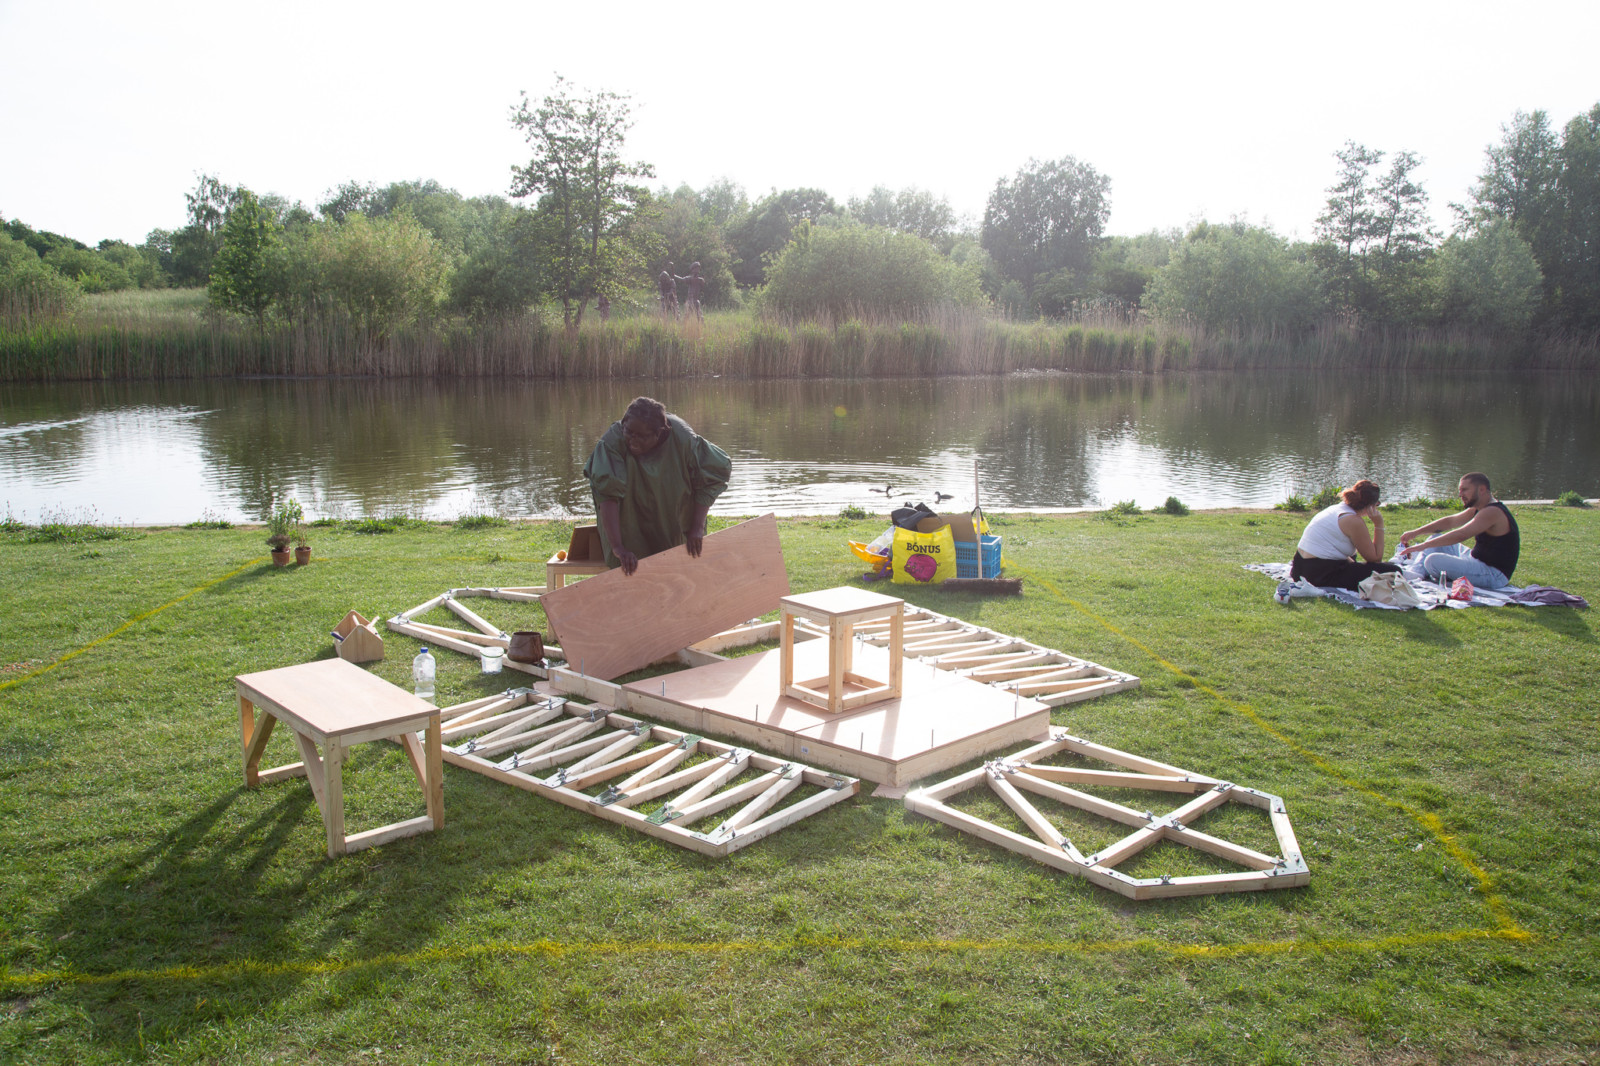 Sonia Hughes building a small wooden structure on the grass in front of a lake.